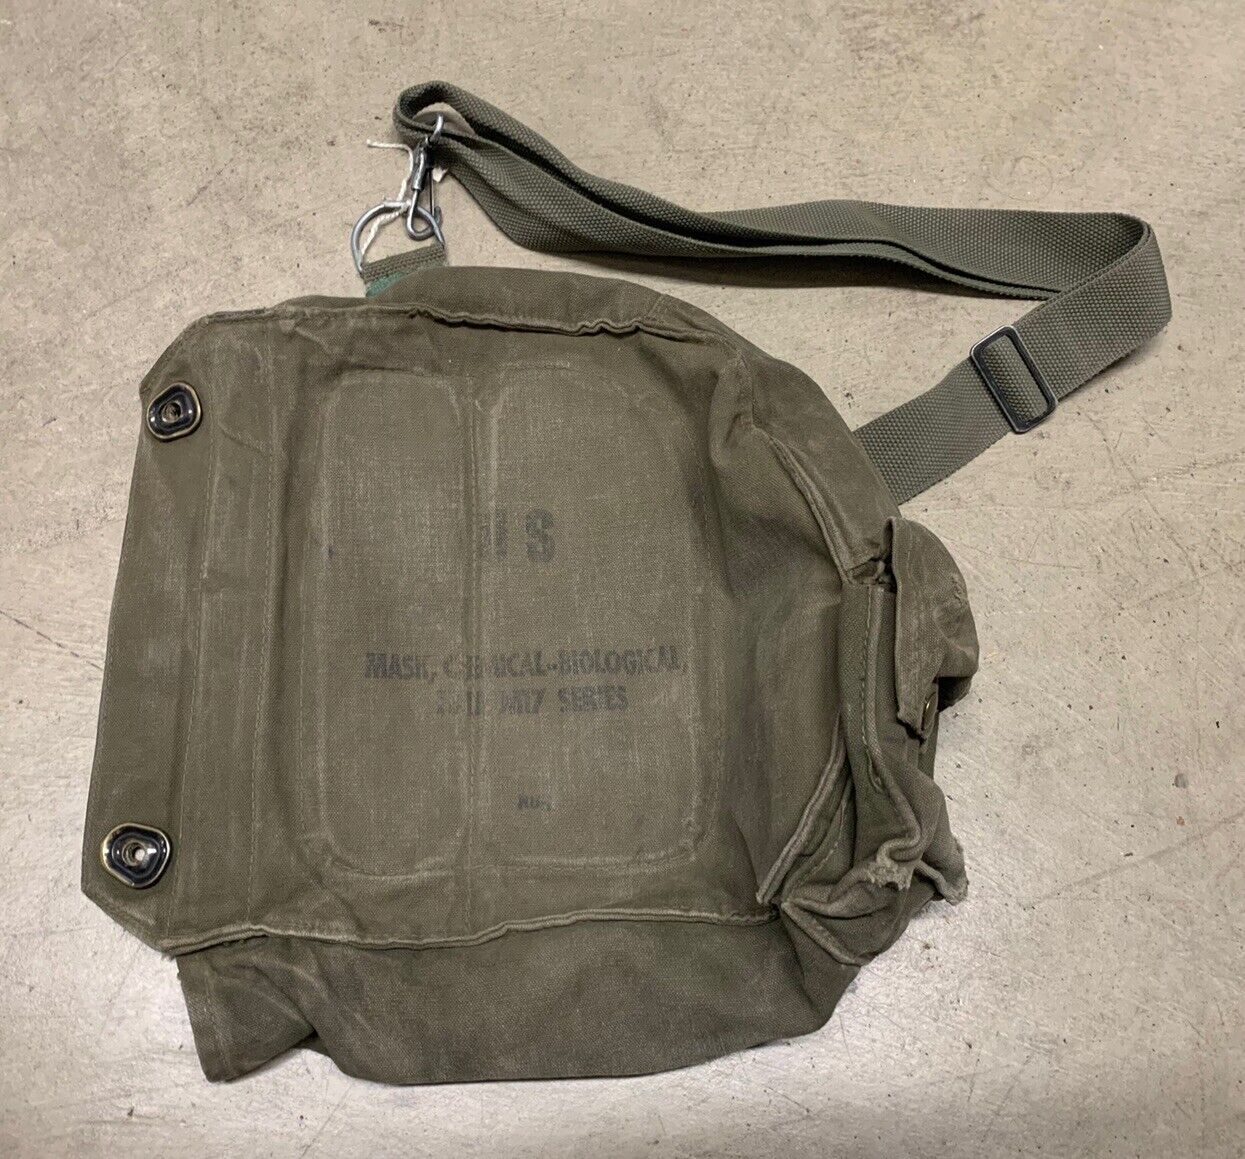 US Military M17 Gas Mask Carrier Bag